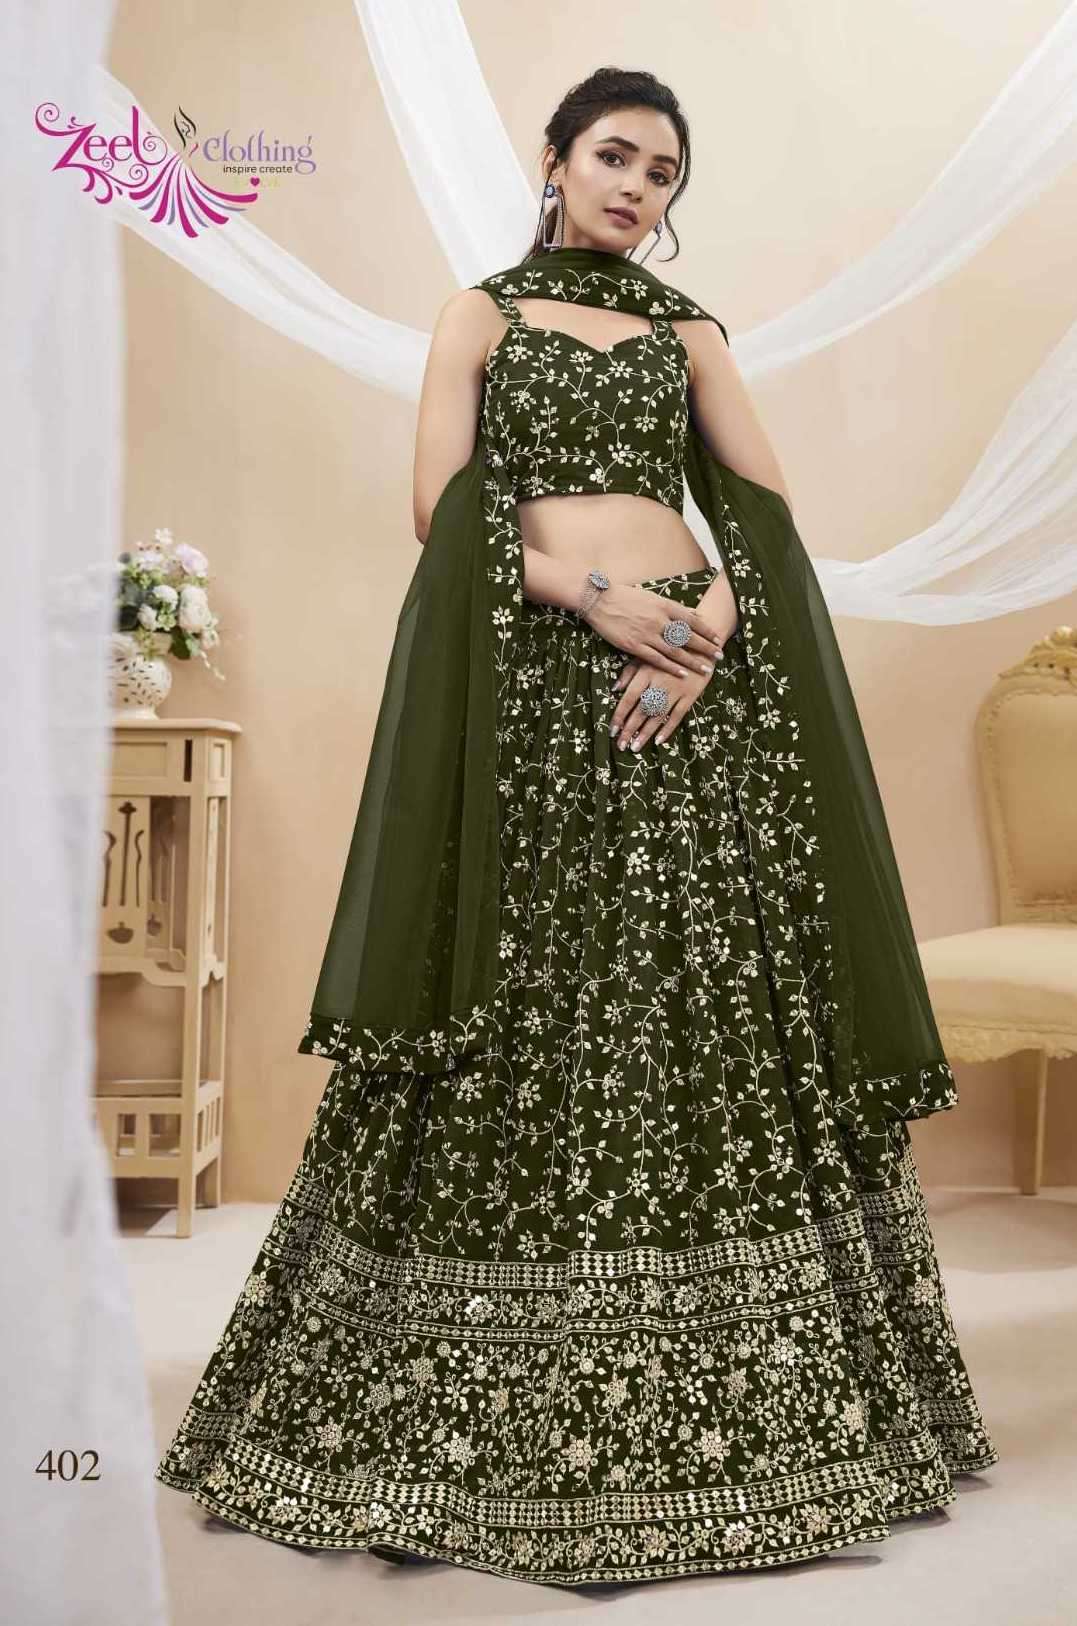 RUHANA VOL-1 SERIES 401 TO 406 BY ZEEL DESIGNER WITH HEVAY WORK GEORGETTE LEHENGAS ARE AVAILABLE AT WHOLESALE PRICE